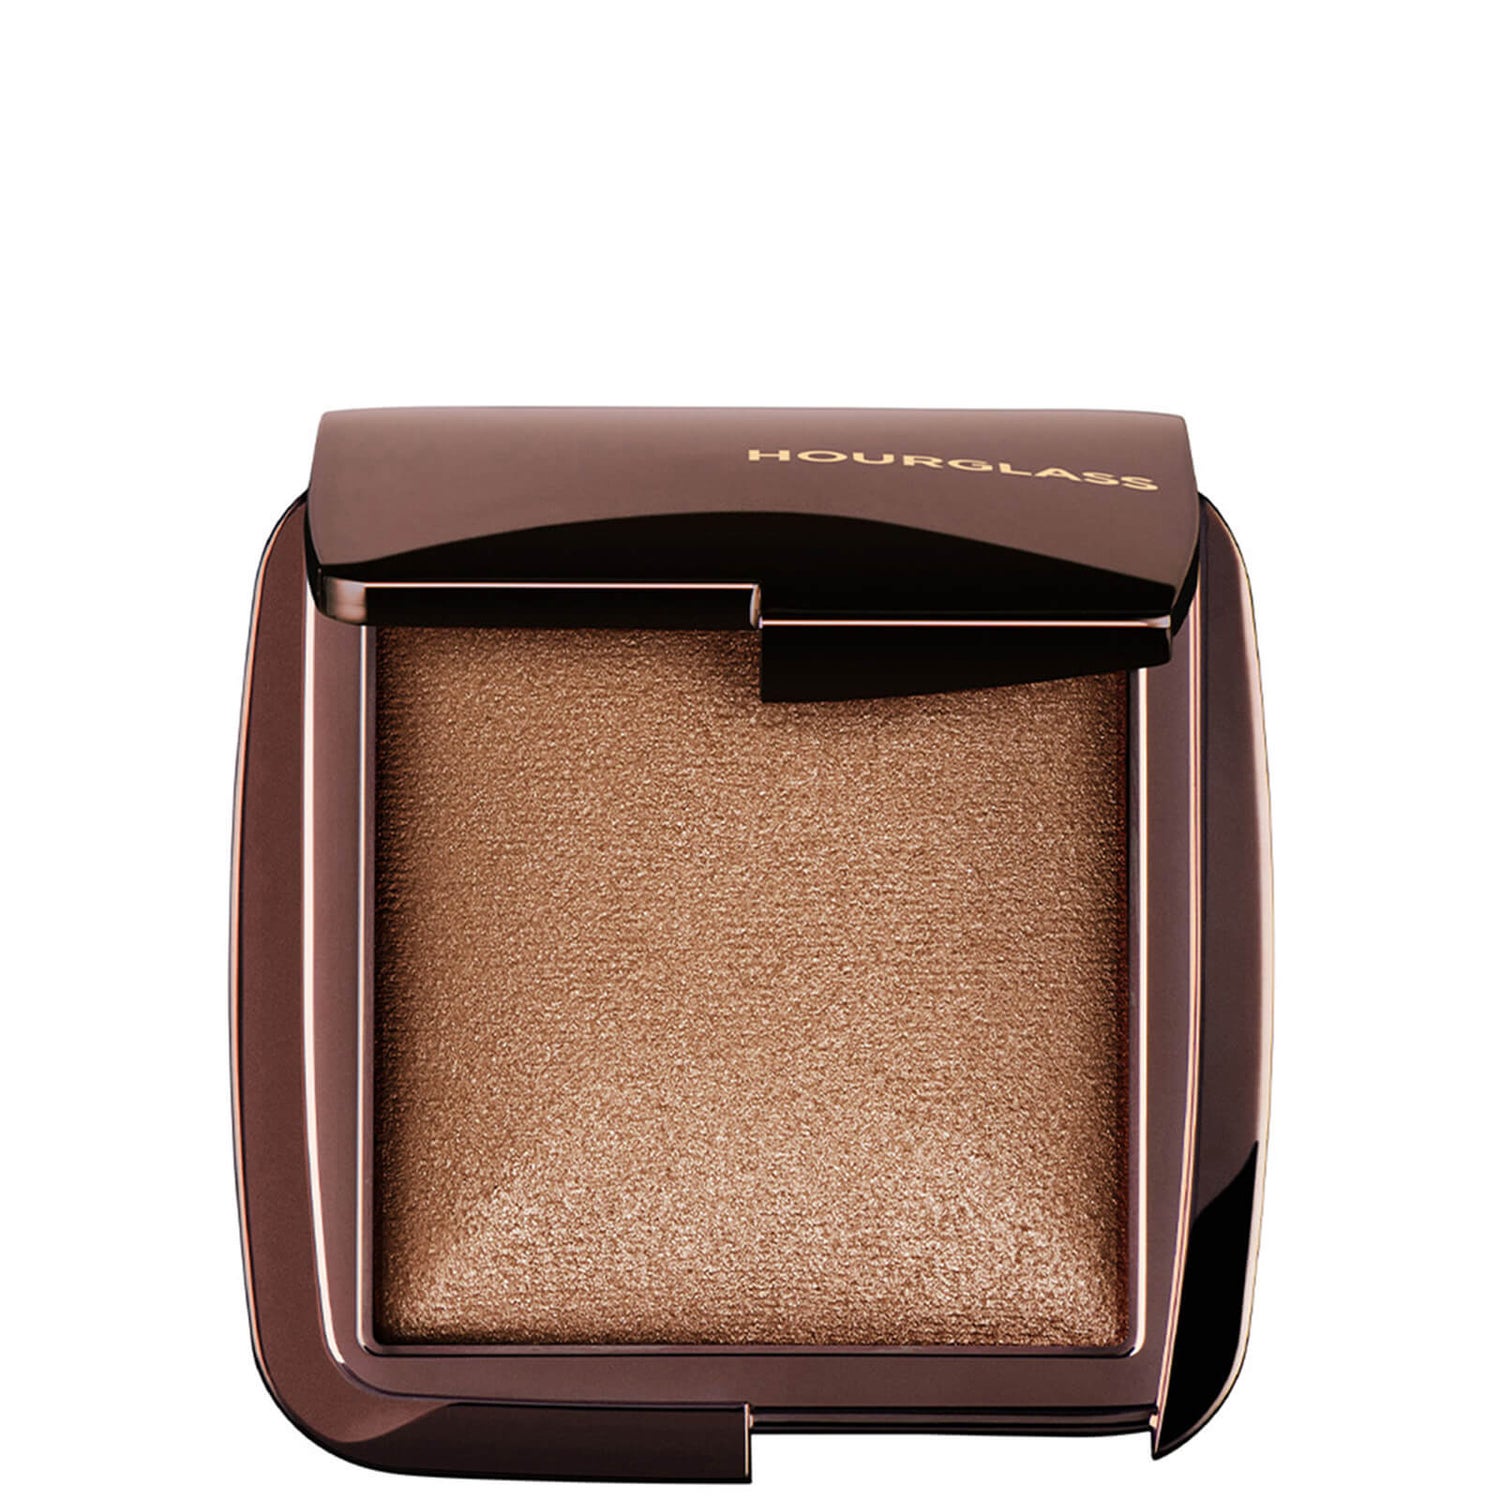 Hourglass Ambient Lighting Powder 10g (Various Shades)